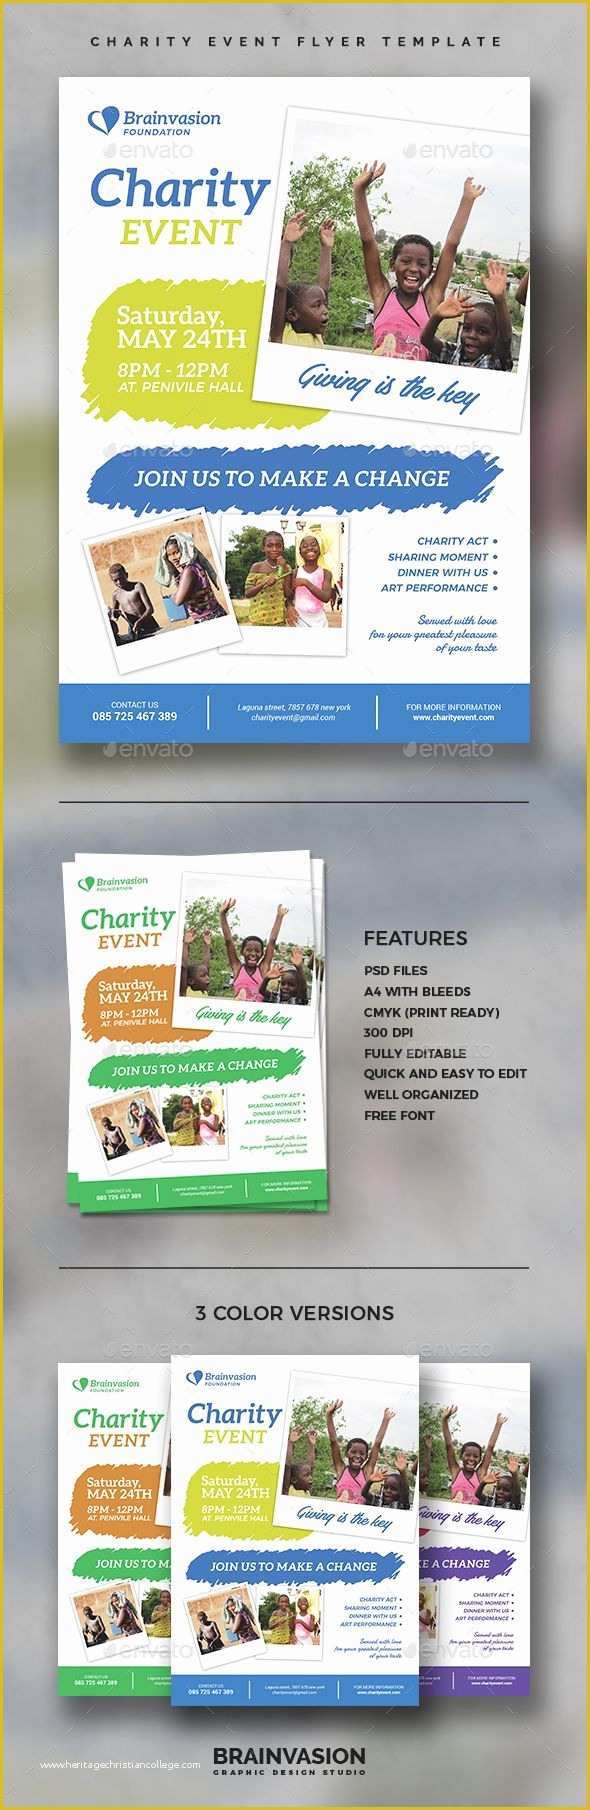 Charity event Flyer Templates Free Of Charity event Flyer Templates Free Yourweek Dd0539eca25e